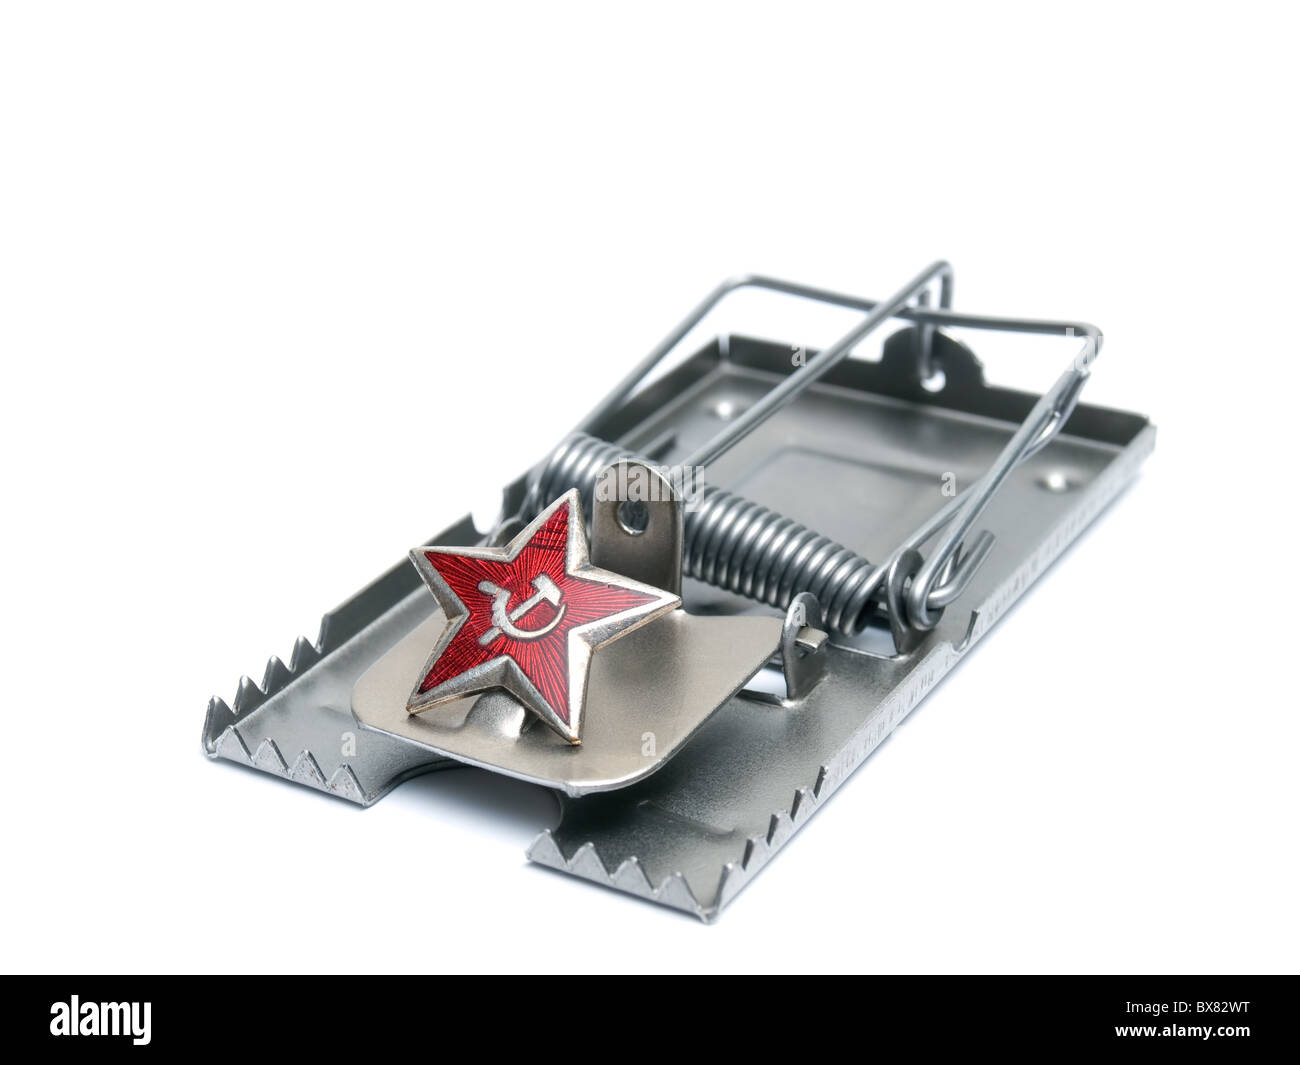 https://c8.alamy.com/comp/BX82WT/red-communist-star-on-the-mousetrap-isolated-on-a-white-background-BX82WT.jpg